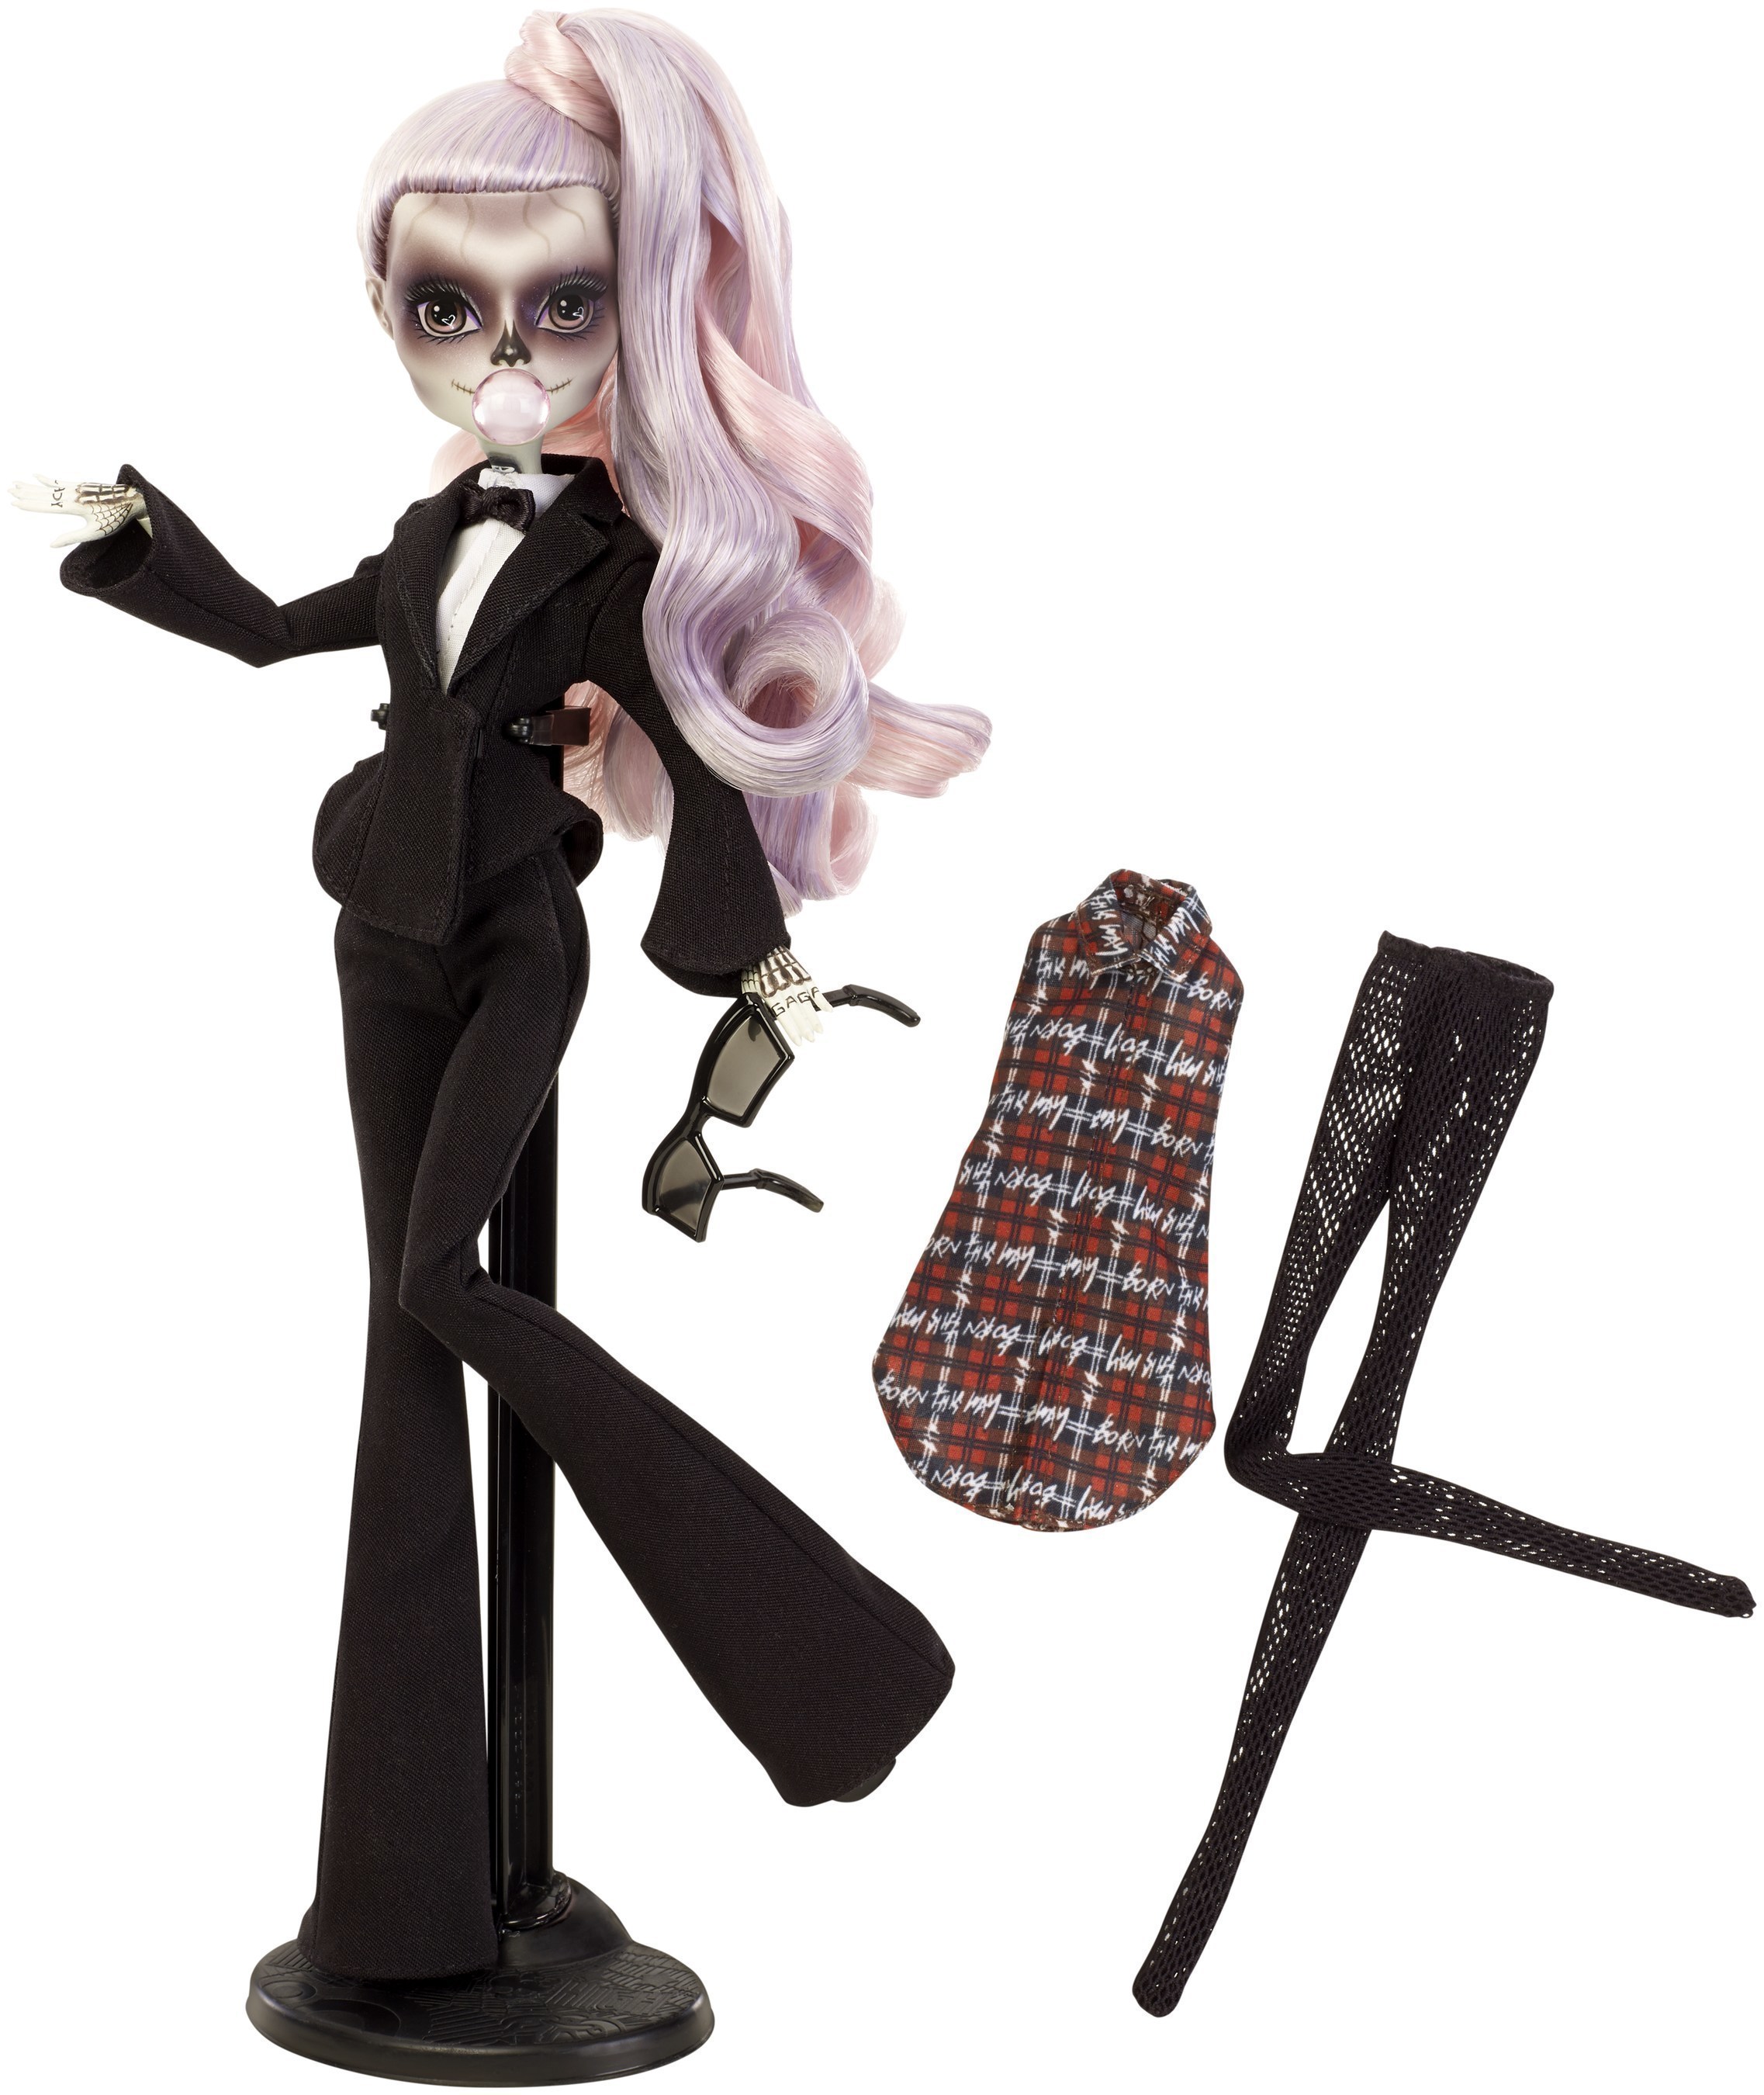 Today, Monster High and Born This Way Foundation revealed Zomby Gaga, a doll inspired by Lady Gaga to champion kindness, instill bravery, and build a world where young people celebrate their differences.